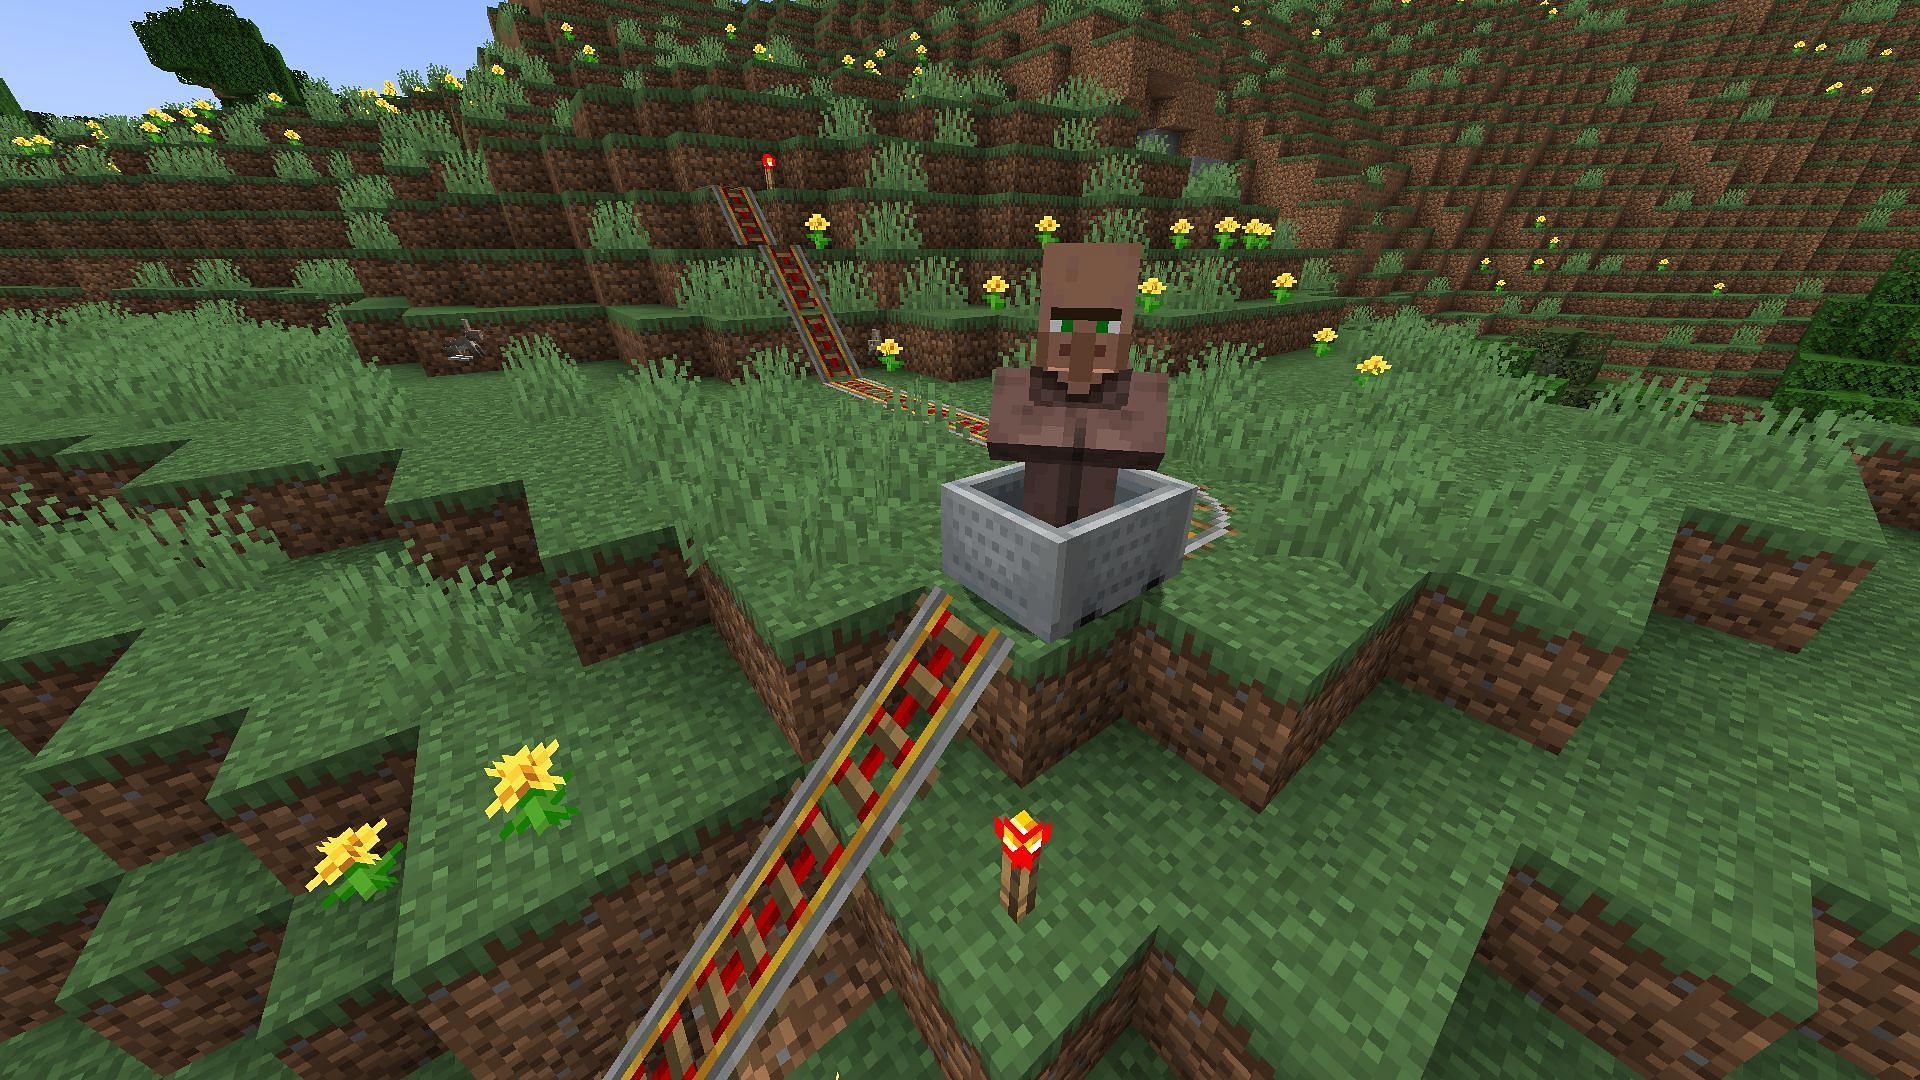 Villagers can be easily transported to the top of any mountain using powered rails and minecart in Minecraft (Image via Mojang)